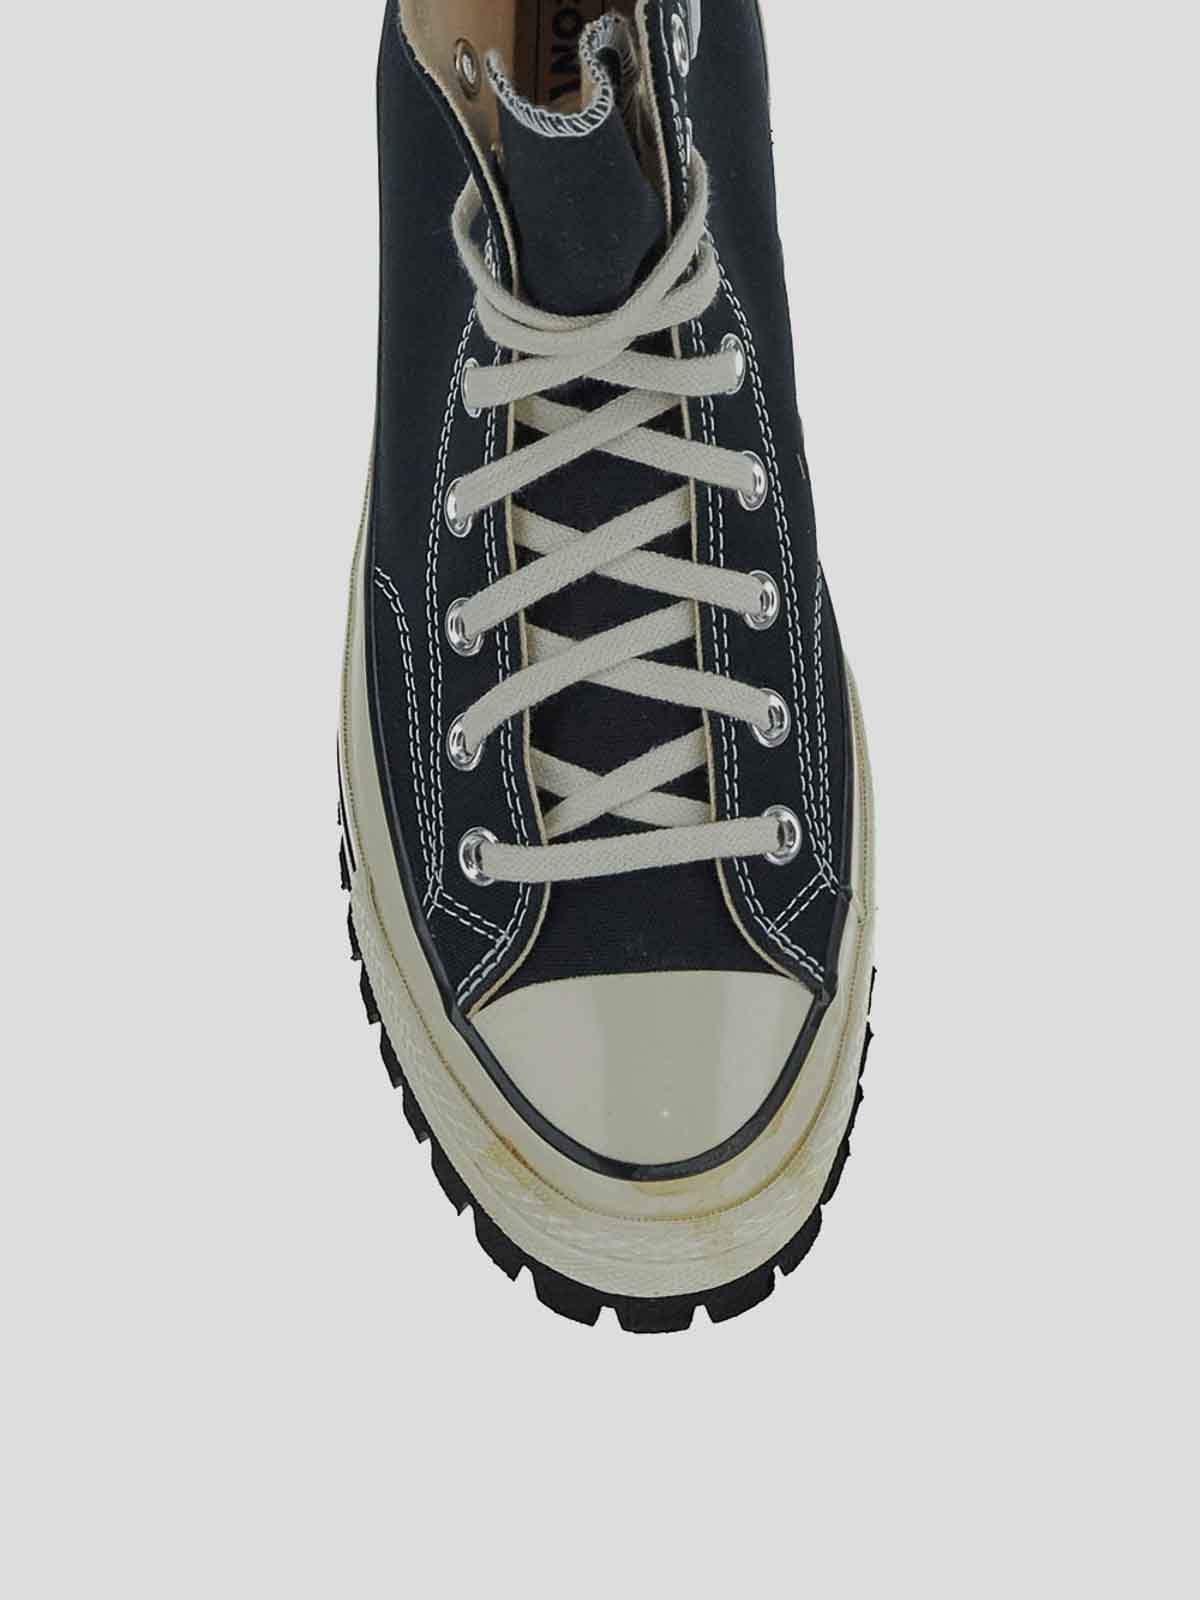 Shop Converse Black Shoes With Round Toe